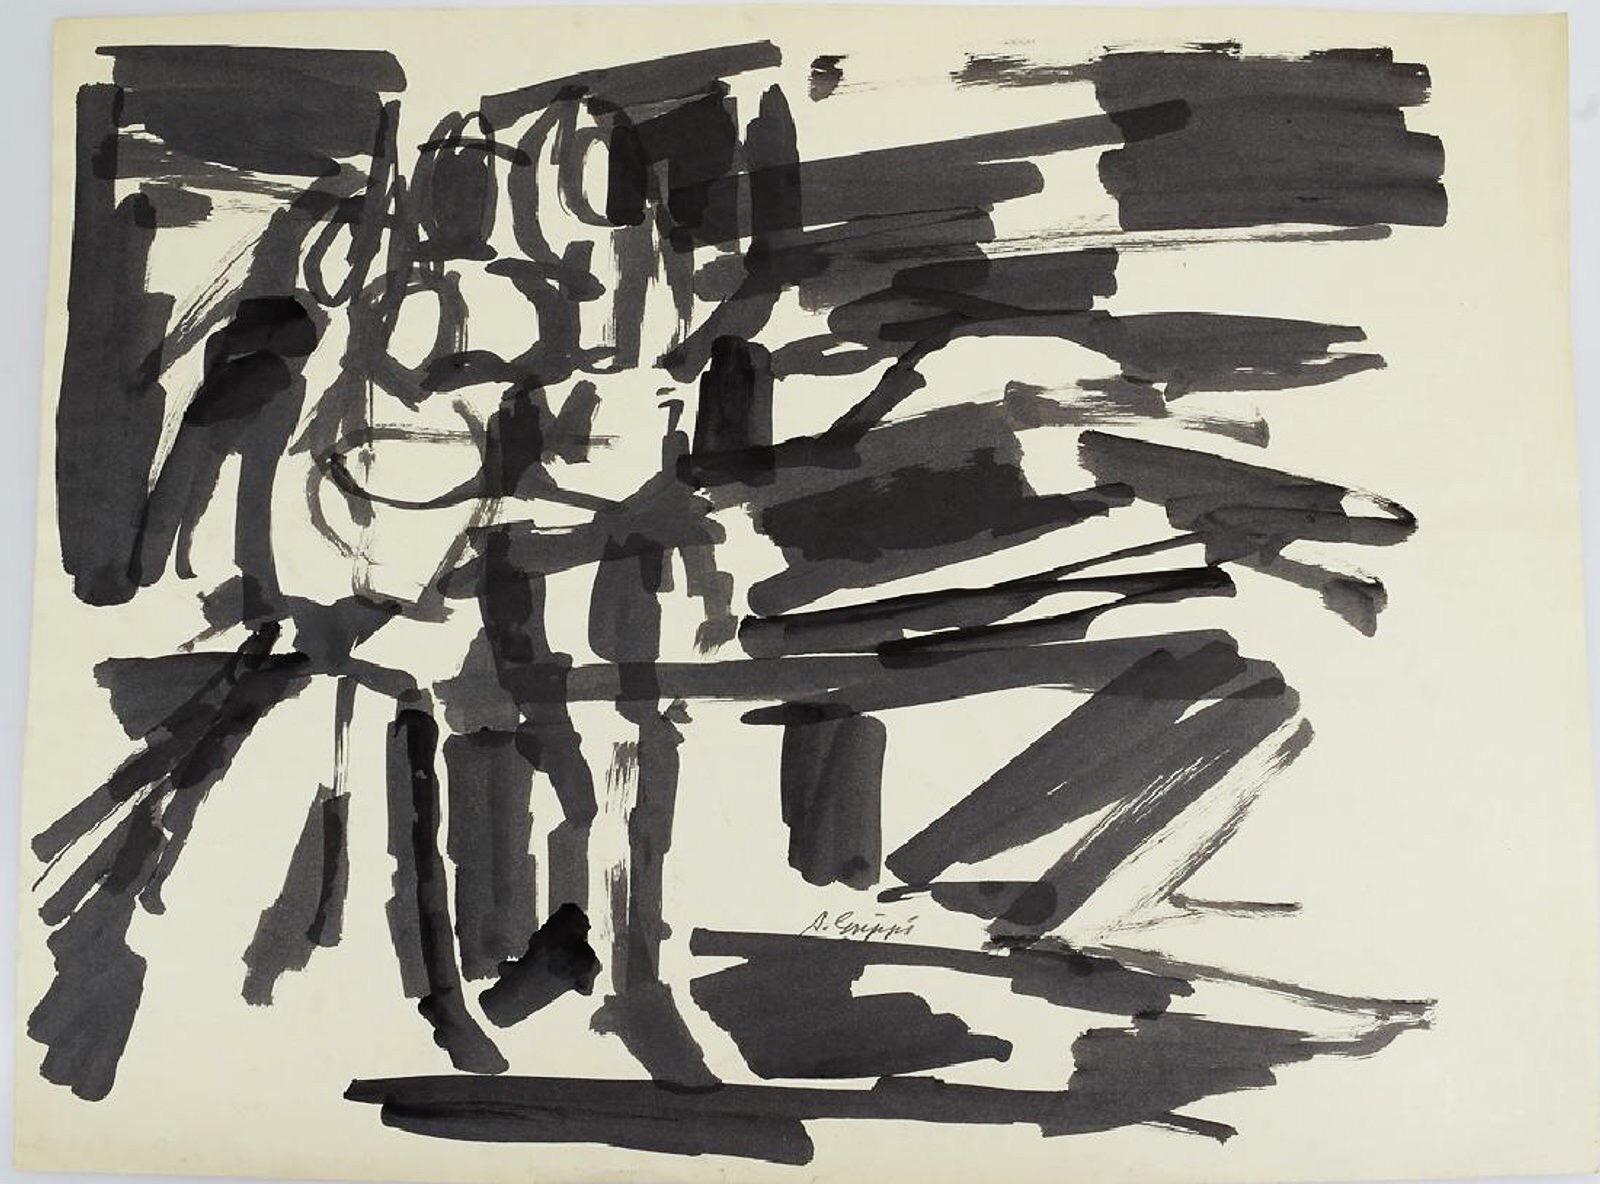 Abstract Expressionist Gestural Black & White Pen & Ink Work by Salvatore Grippi
'
Gorgeous early pen and ink on paper work by Salvatore Grippi.  Signed. Circa 1955-56
New York School 

measures approximately 24